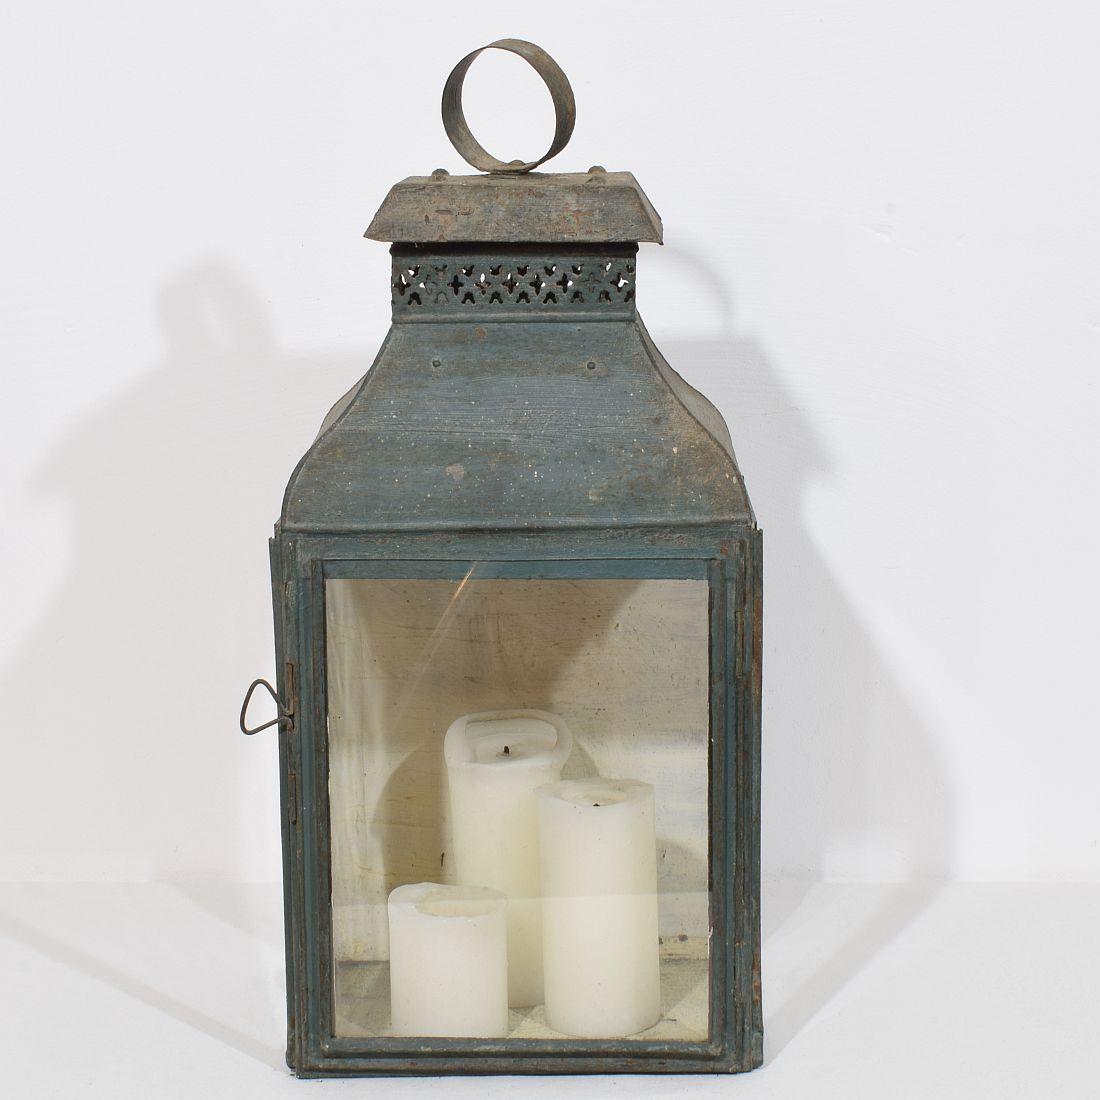 Very rare and early metal lantern, France, circa 1780-1850 with its beautiful original paint.
Weathered.

